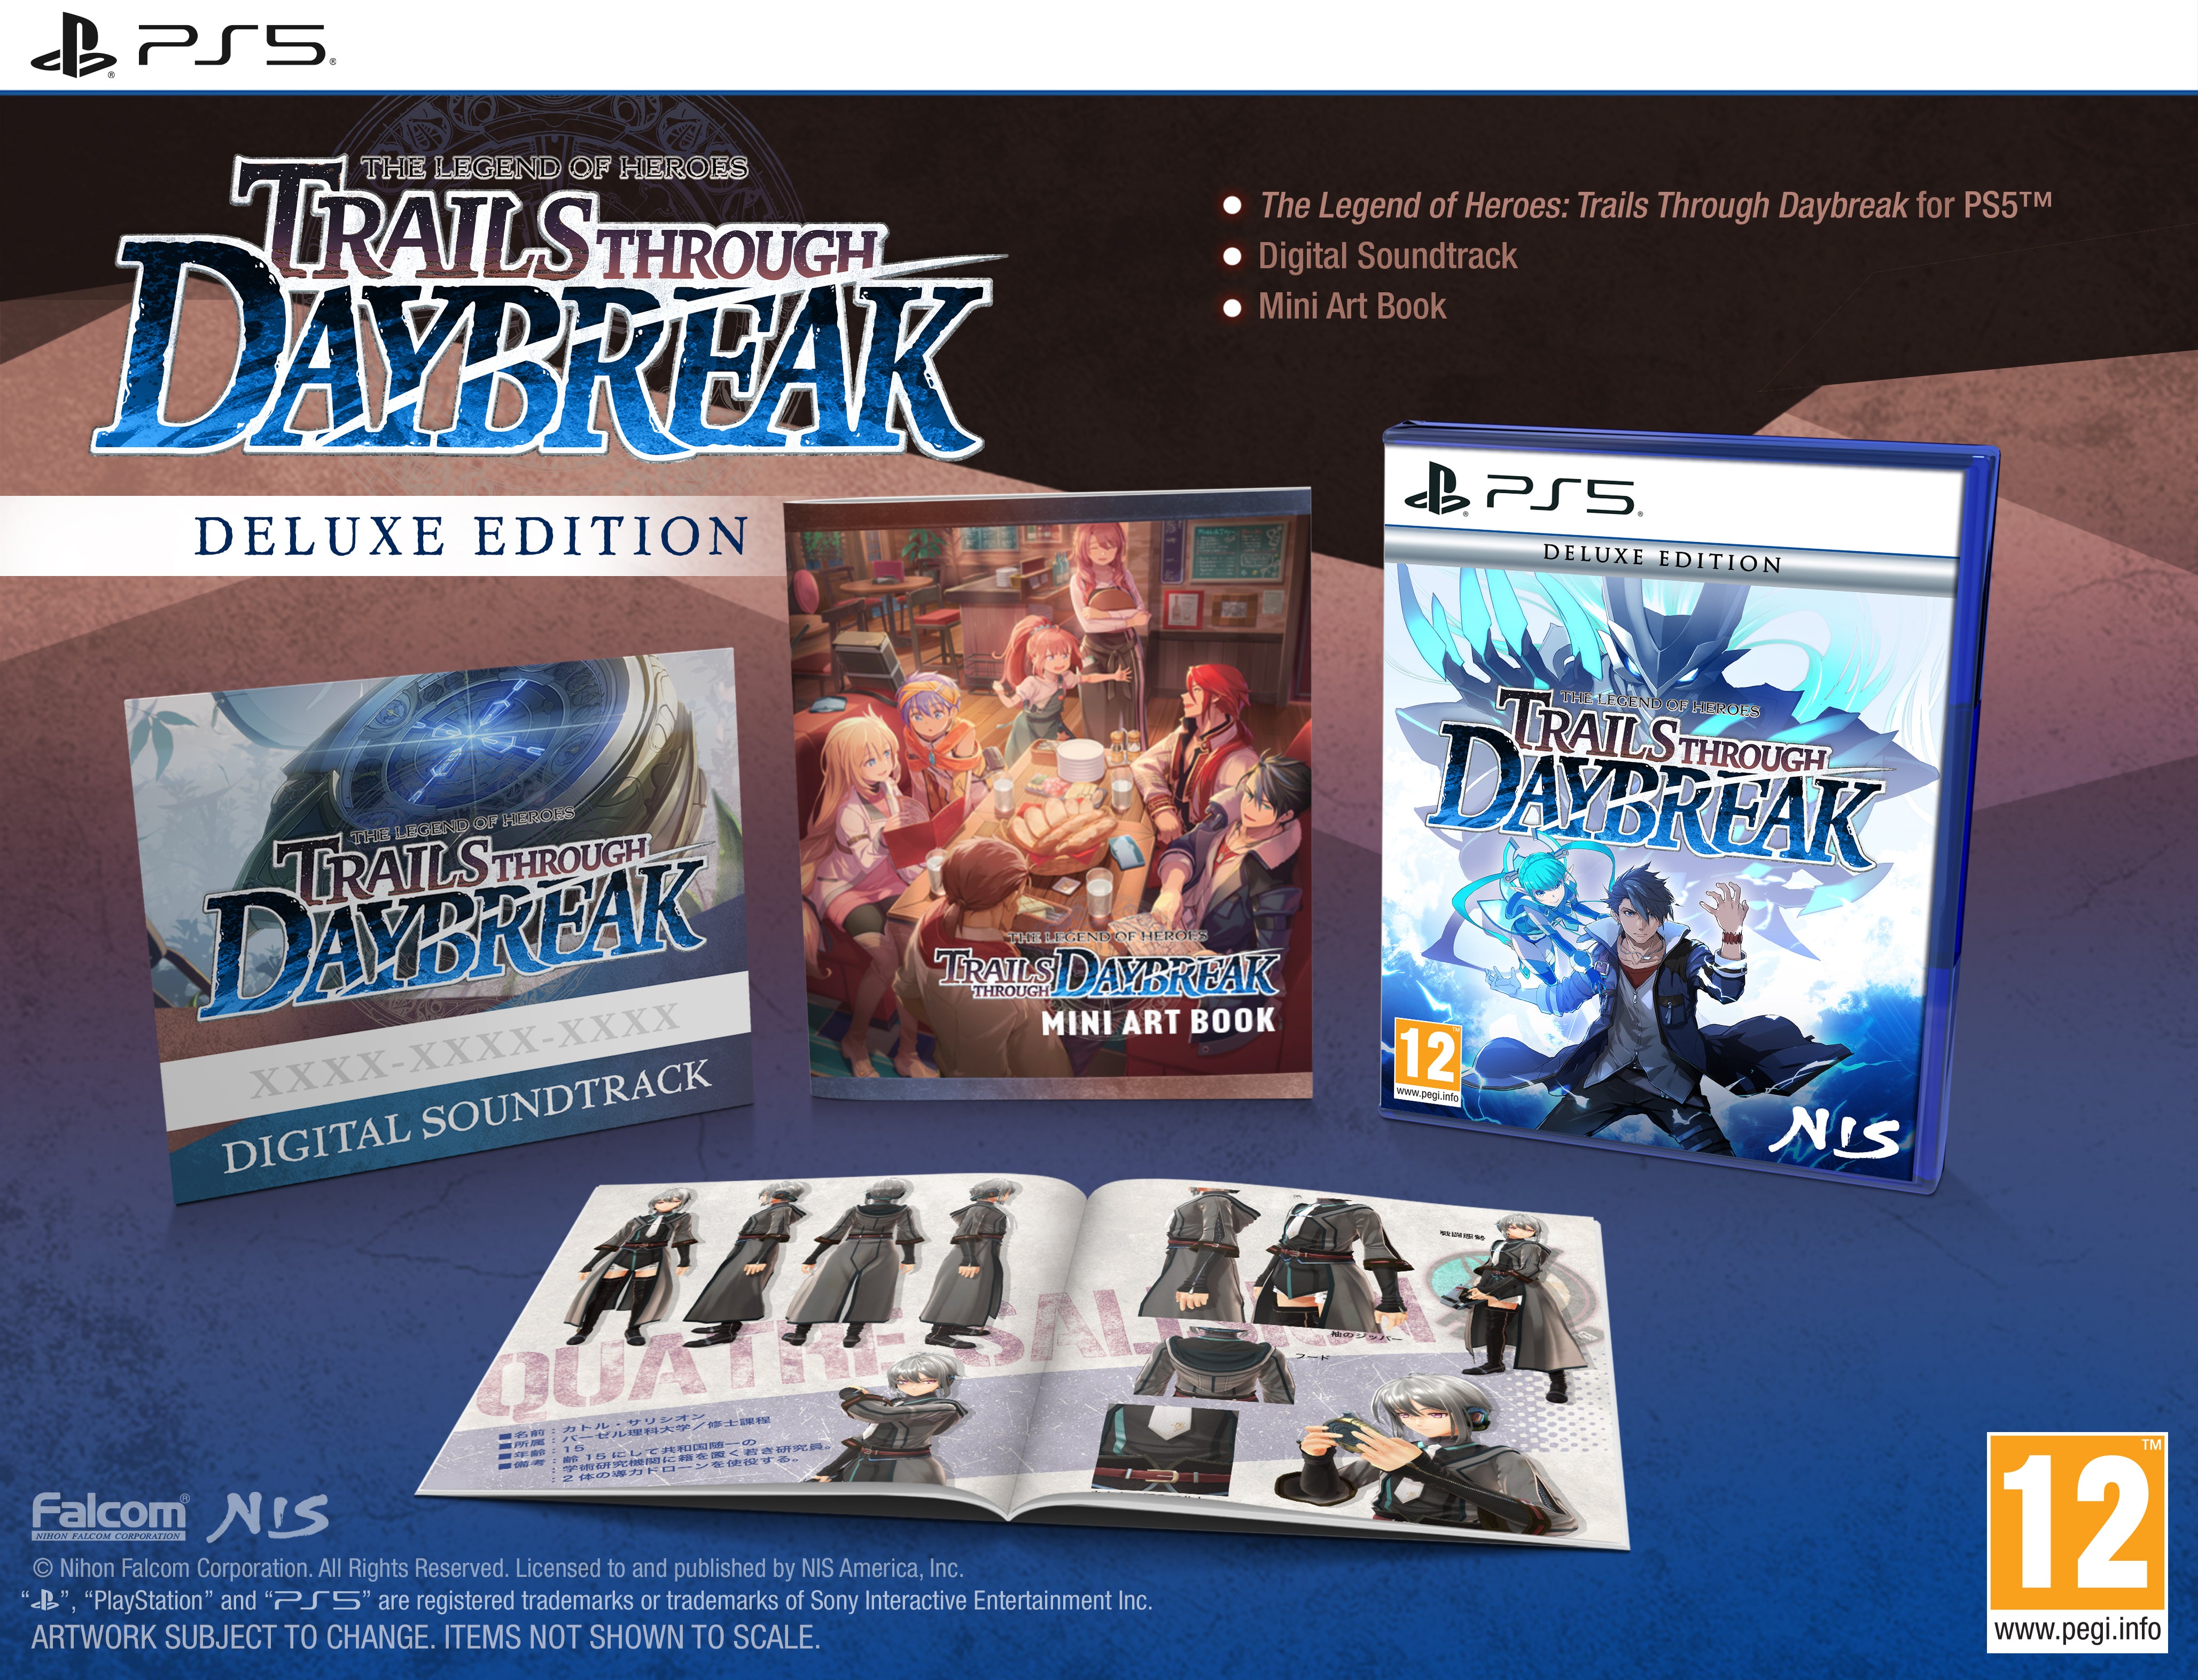 The Legend of Heroes: Trails through Daybreak - Deluxe Edition - PS5®